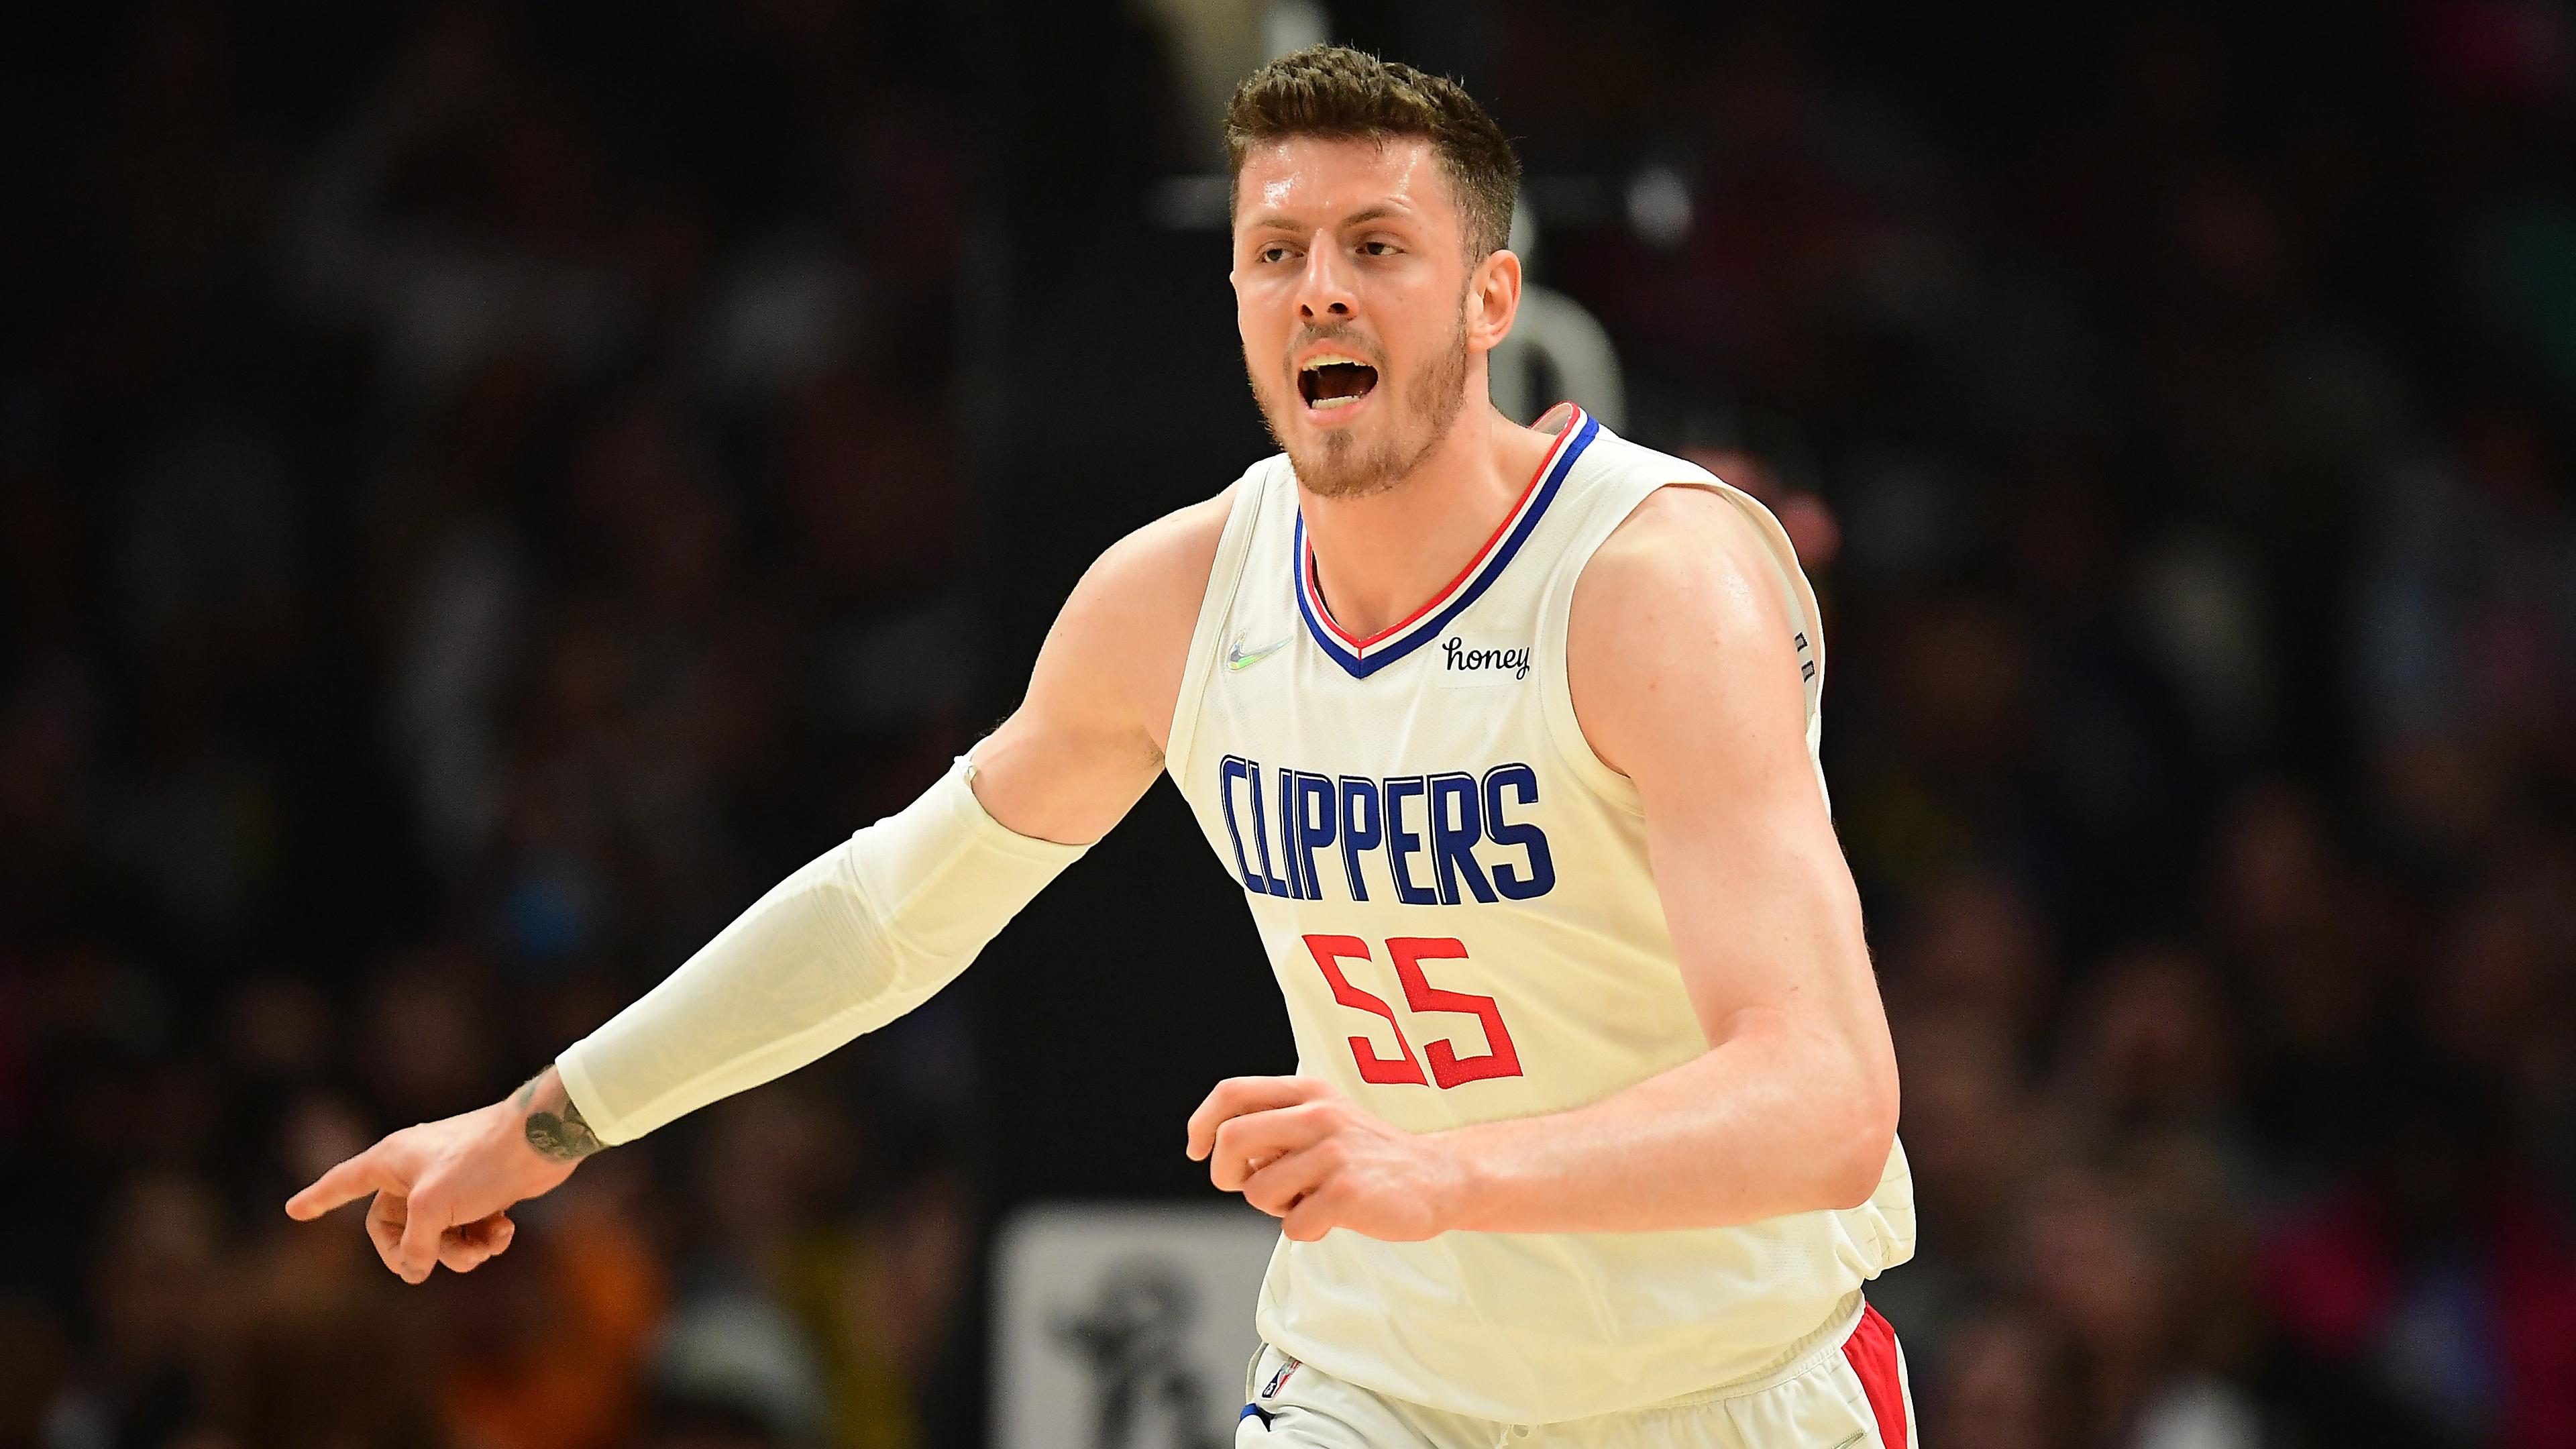 Apr 3, 2022; Los Angeles, California, USA; Los Angeles Clippers center Isaiah Hartenstein (55) reacts after dunks against the New Orleans Pelicans during the first half at Crypto.com Arena. / Gary A. Vasquez-USA TODAY Sports